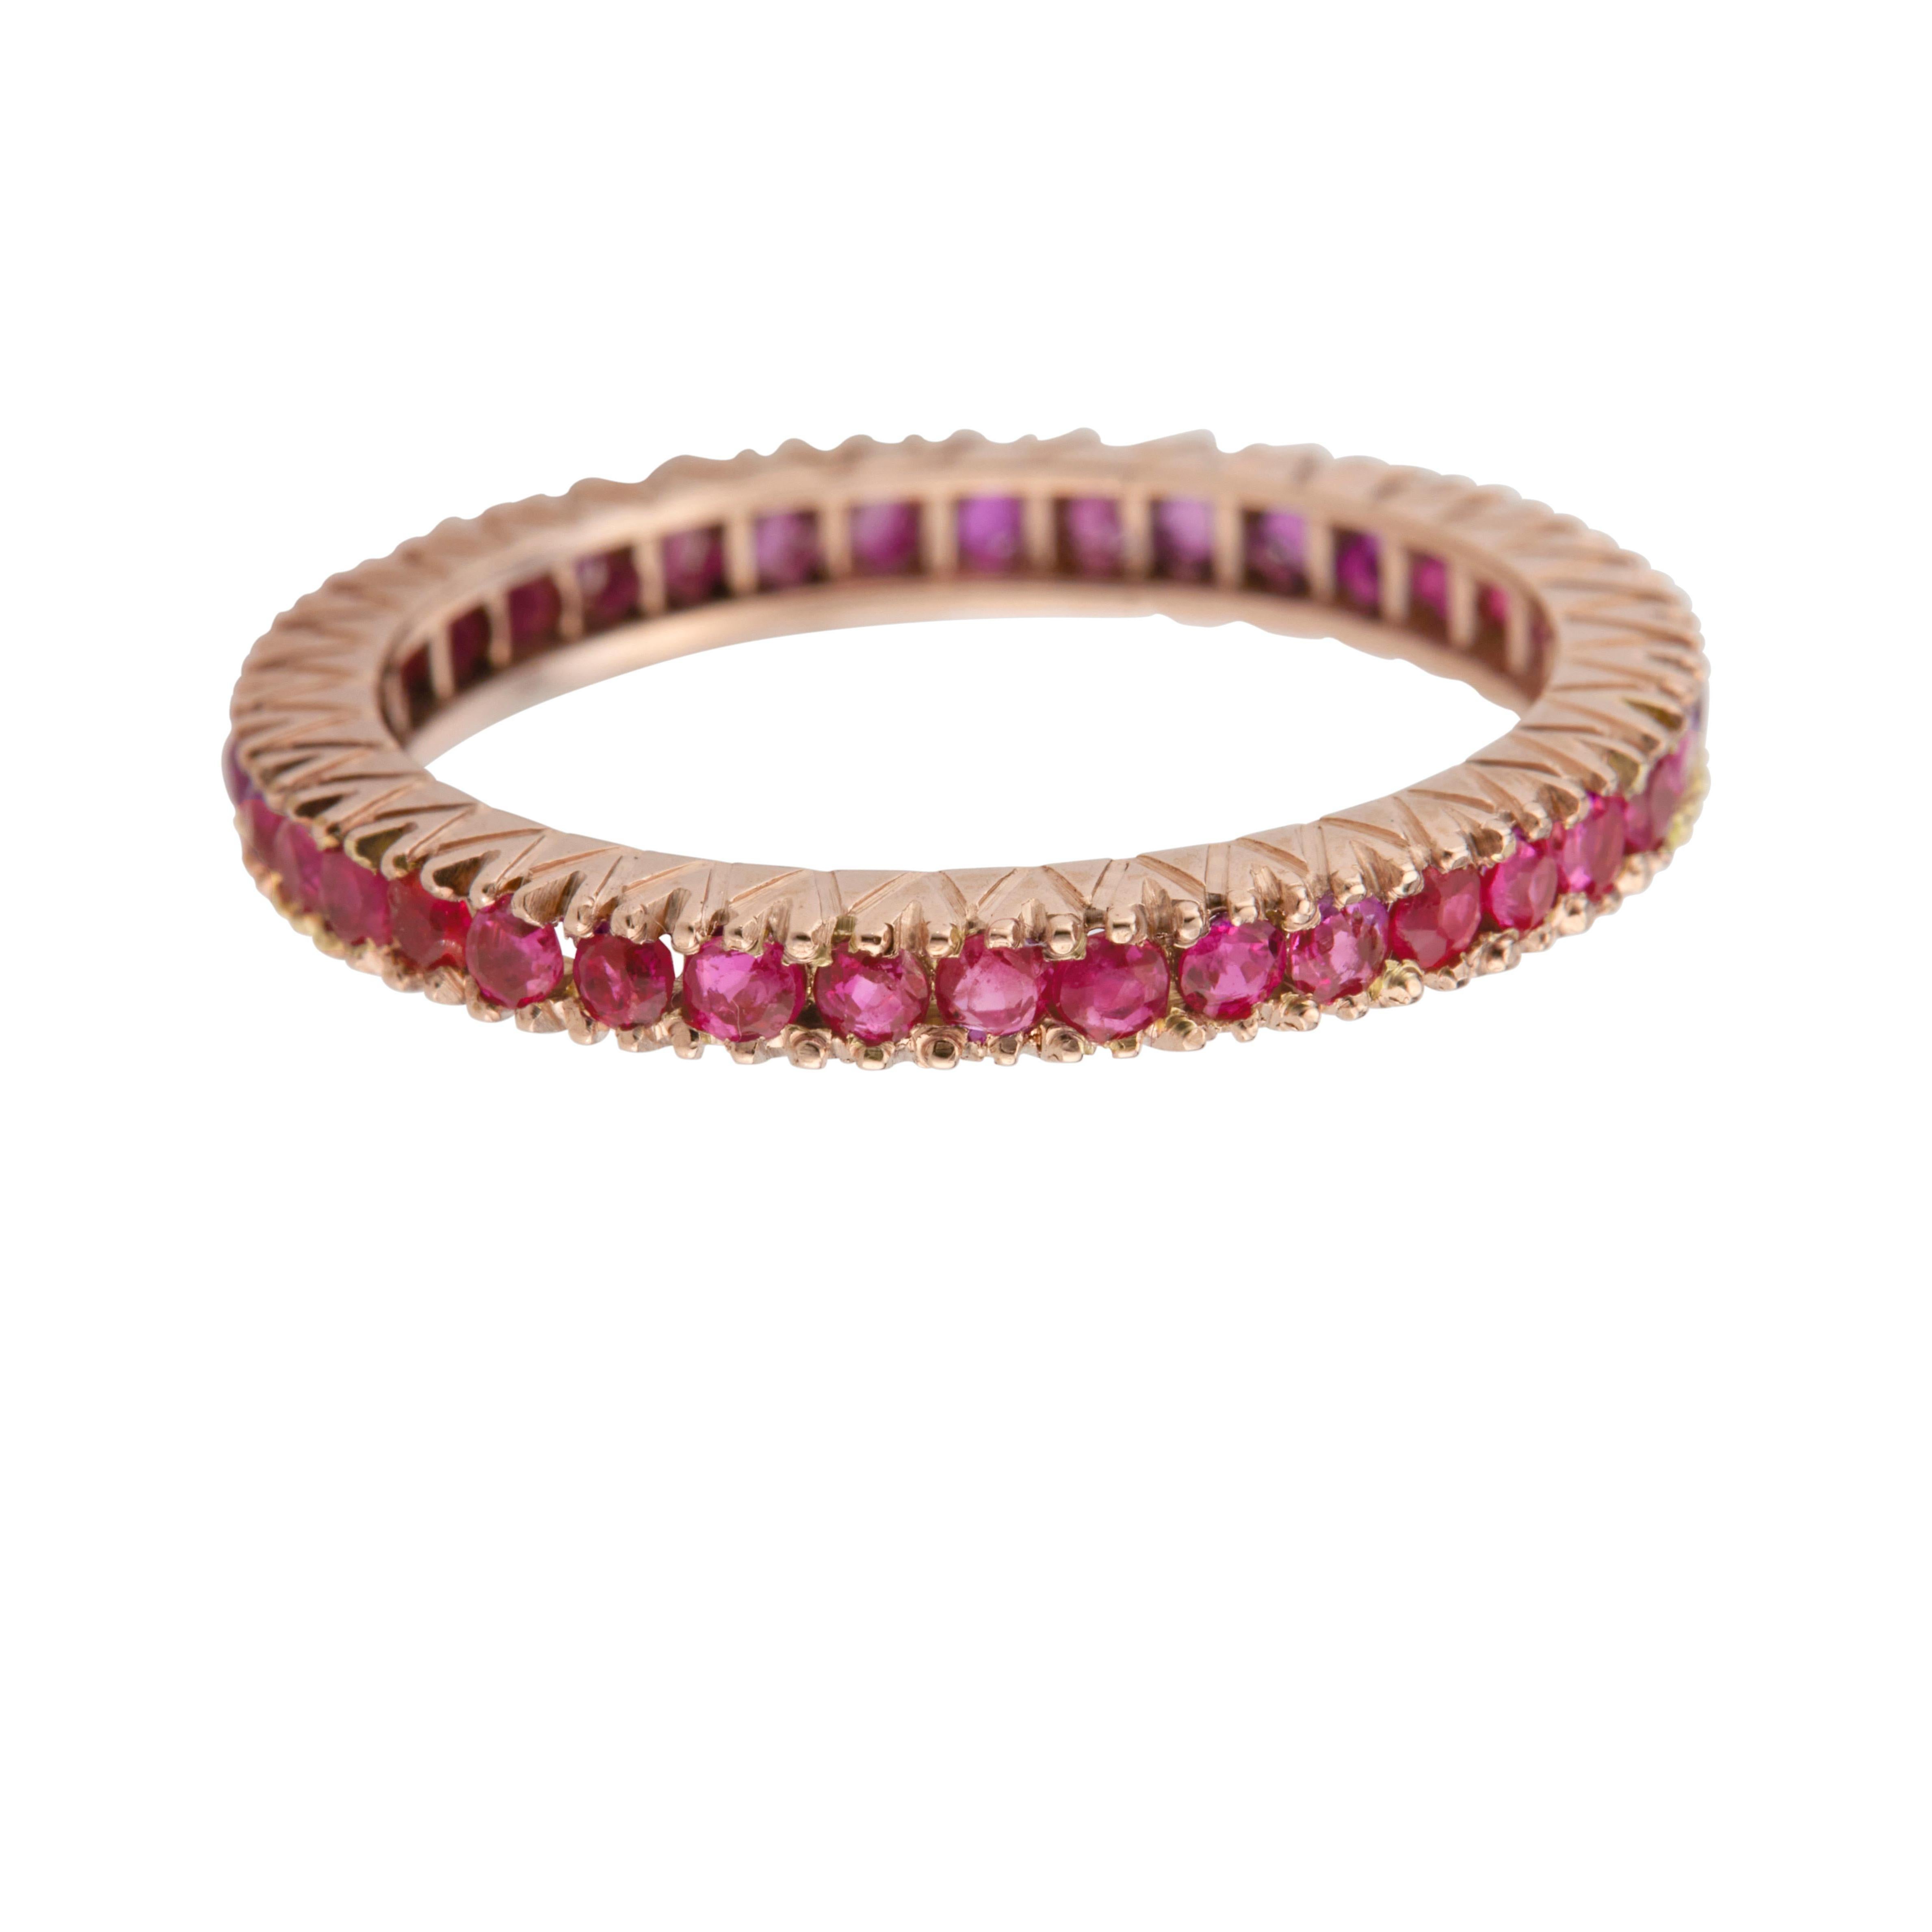 Retro ruby eternity wedding band ring with 40 round pink red natural rubies set in 14k rose gold. 

Approx. 40 round pinkish red genuine natural Rubies, approx. total weight 1.10cts, SI, 1.5mm
Size 7.75 and sizable
14k rose gold
2.3 grams
Tested: